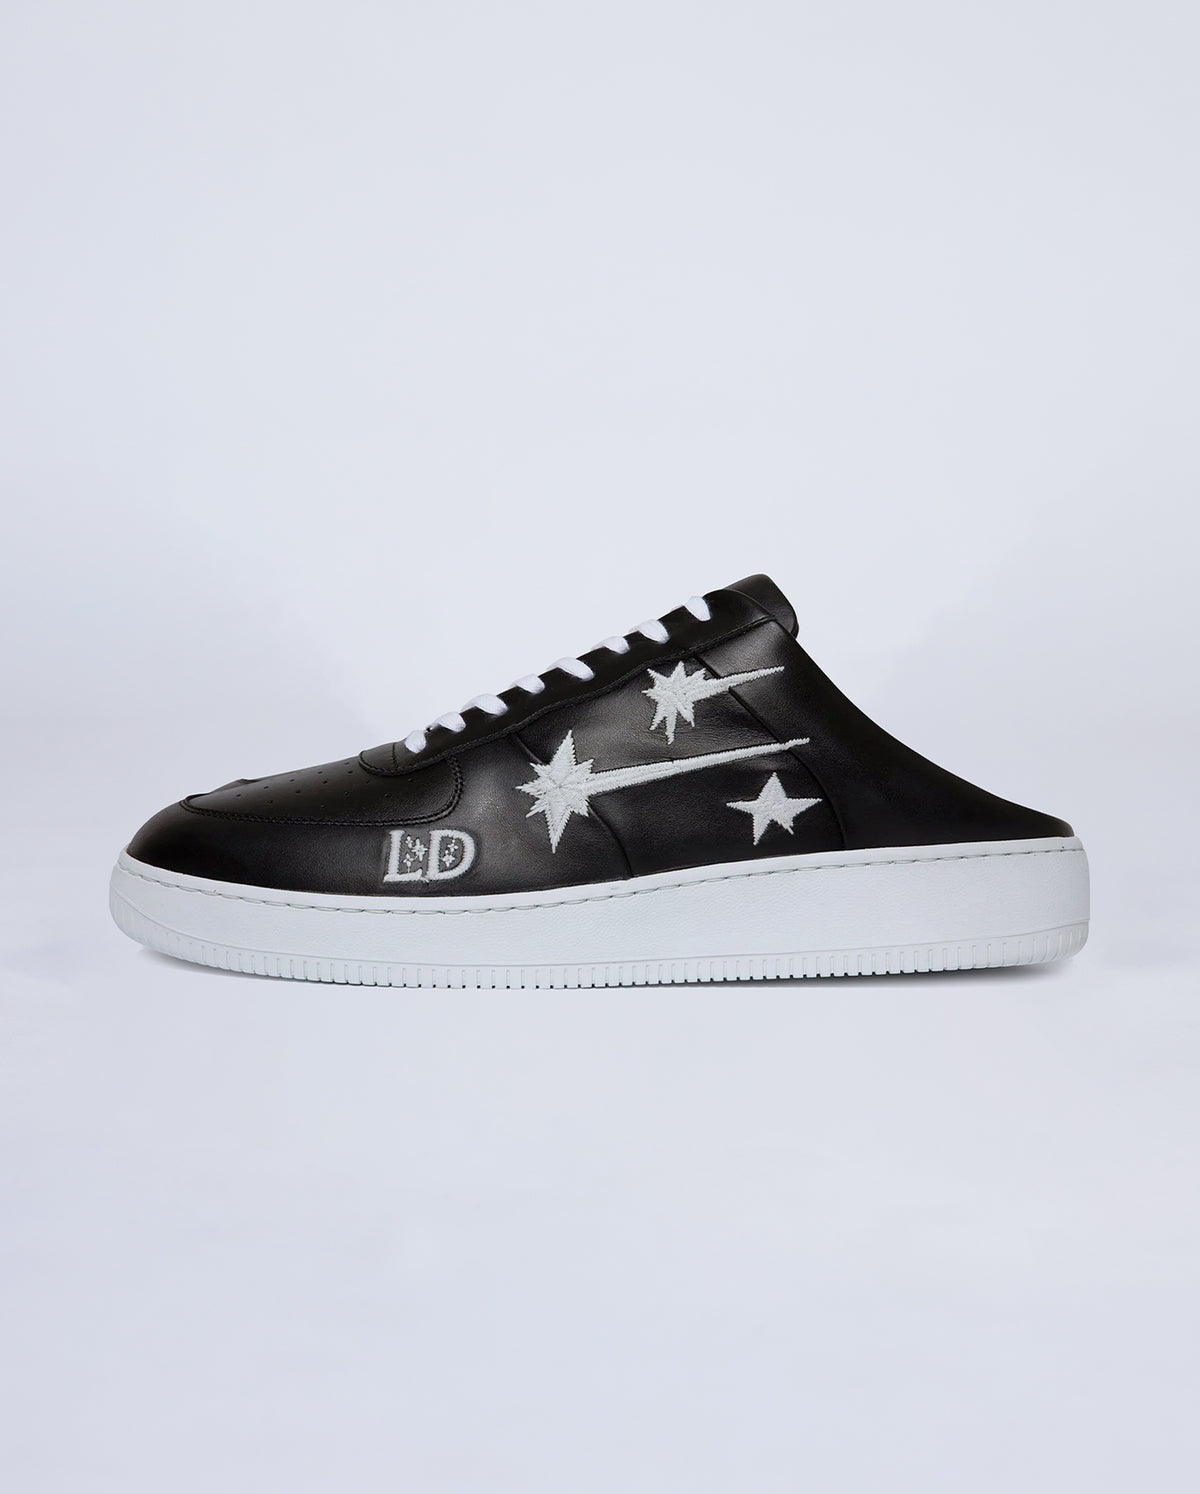 Space Force 1 - Black